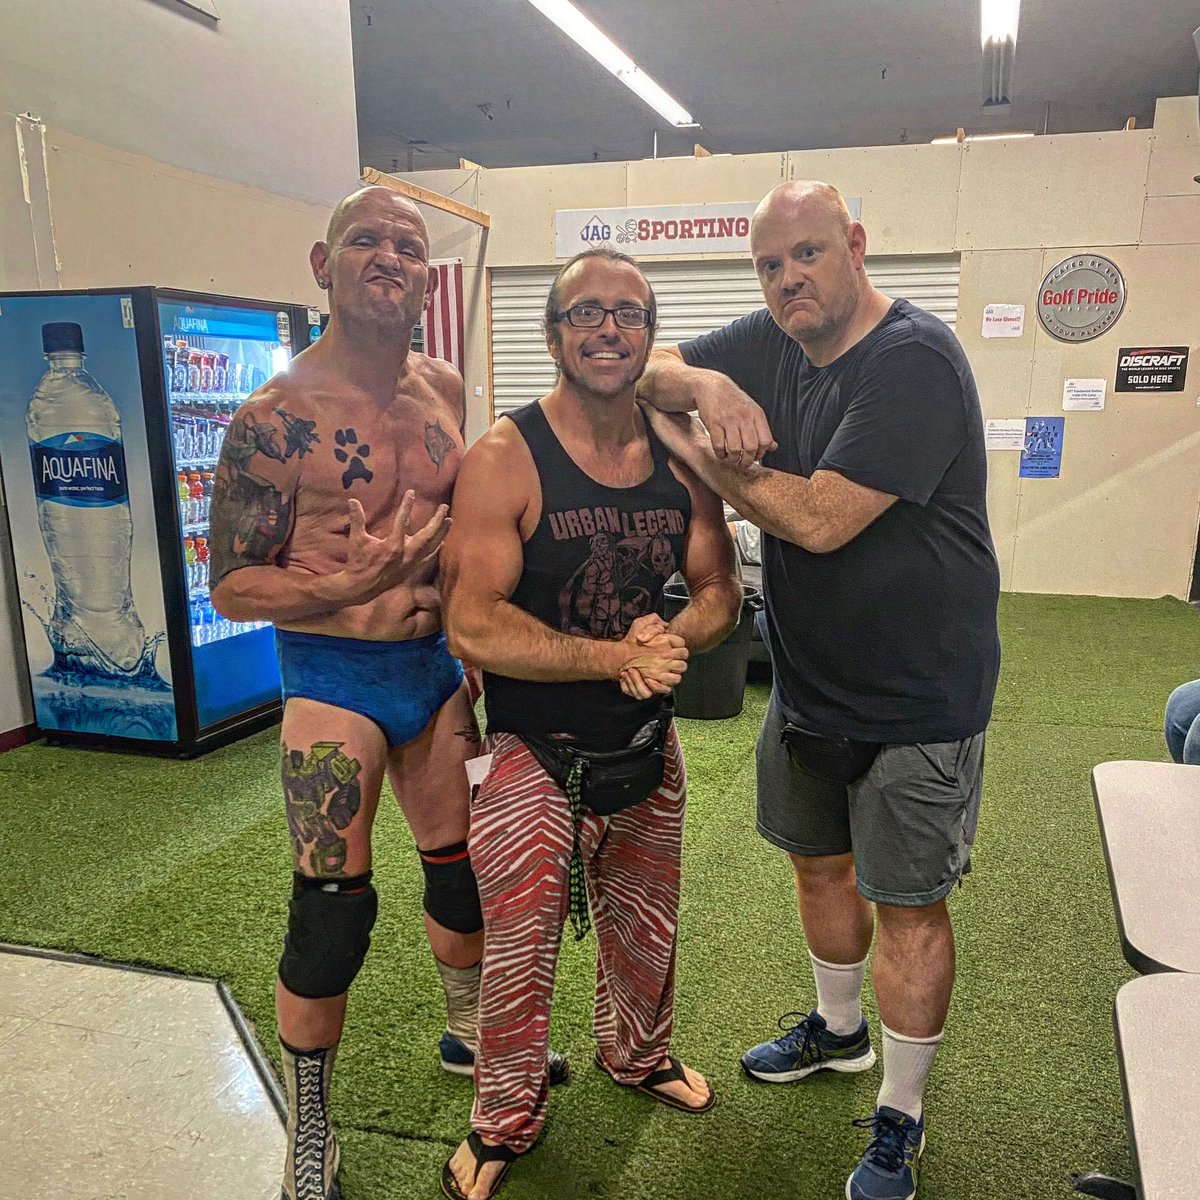 2 years ago today I snapped this photo with @CodyFnHawk & @brutalbobevans 
after my in-ring return.

The amount of knowledge, talent & influence these two legends have is unparalleled & unmatched.   Their fingerprints are all over today’s wrestling scene.

📸 @black_dahlia47